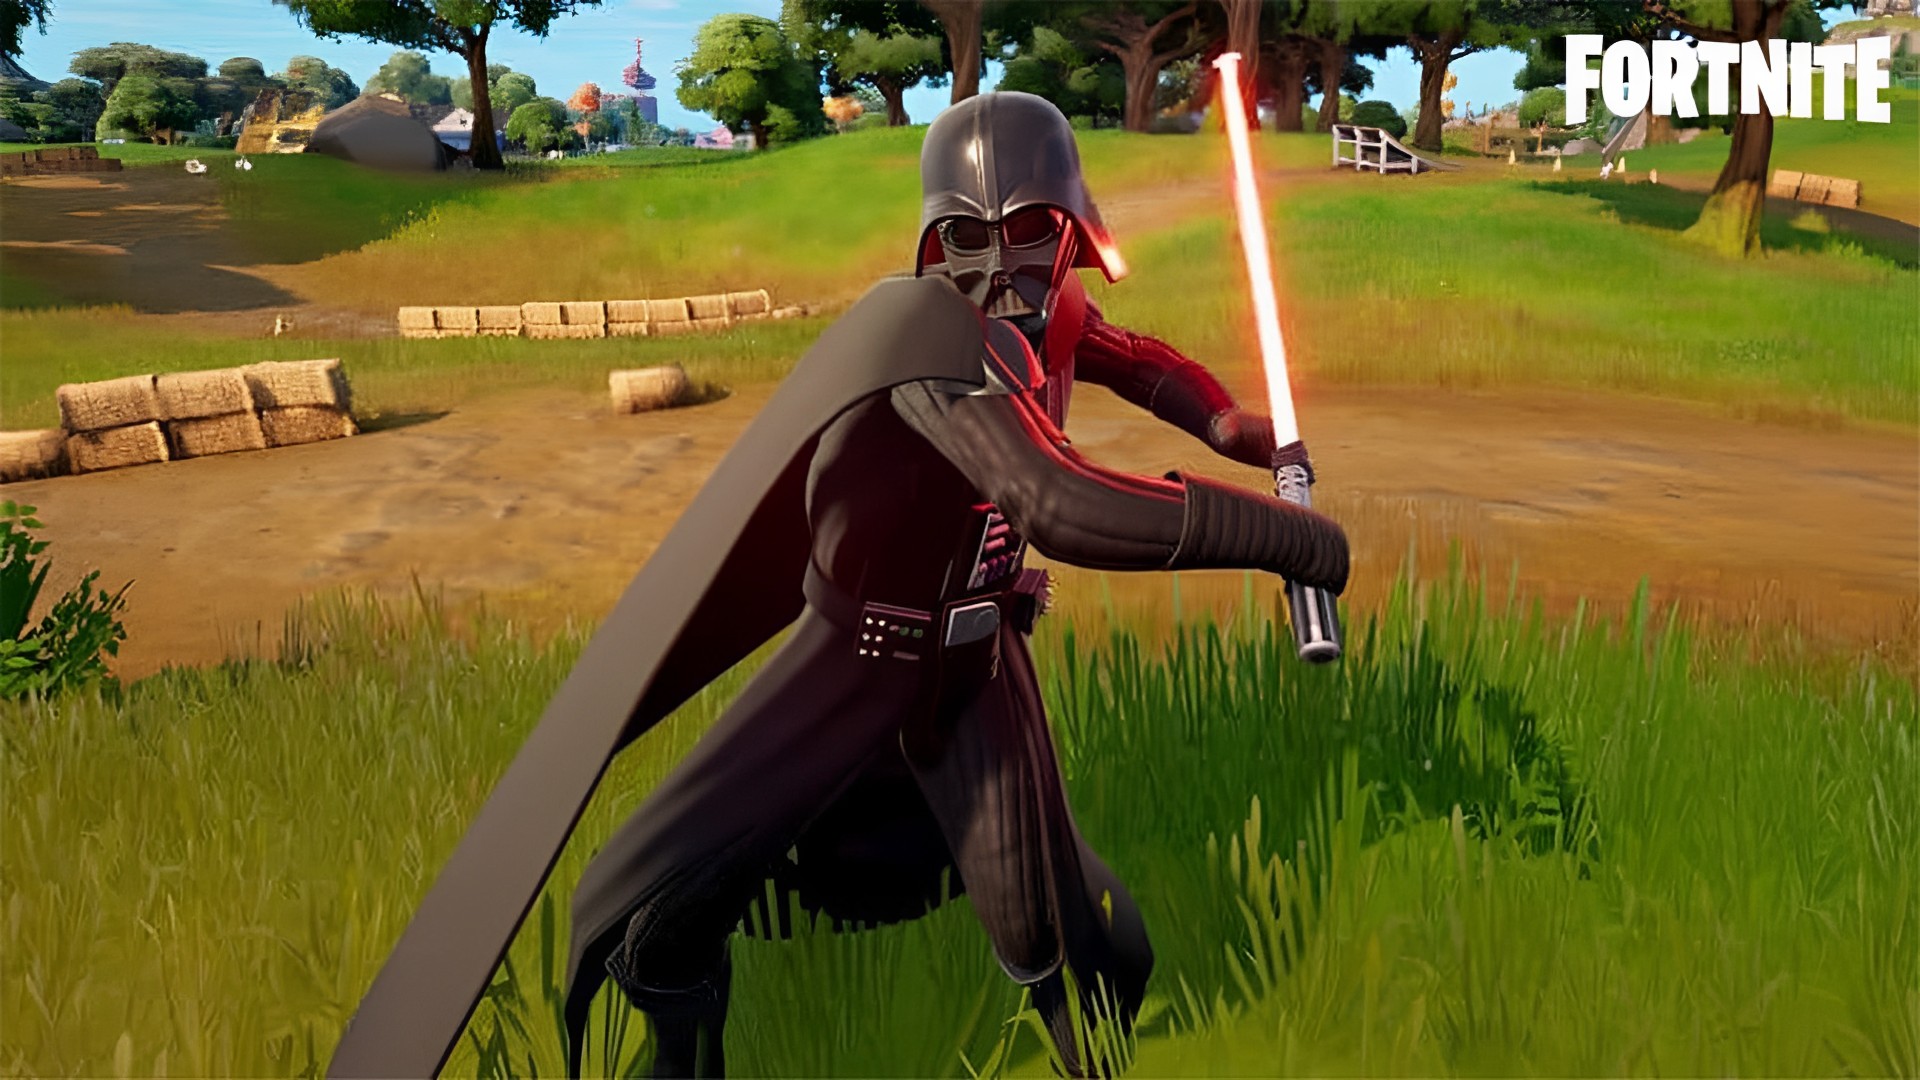 Where to find Lightsabers in Fortnite